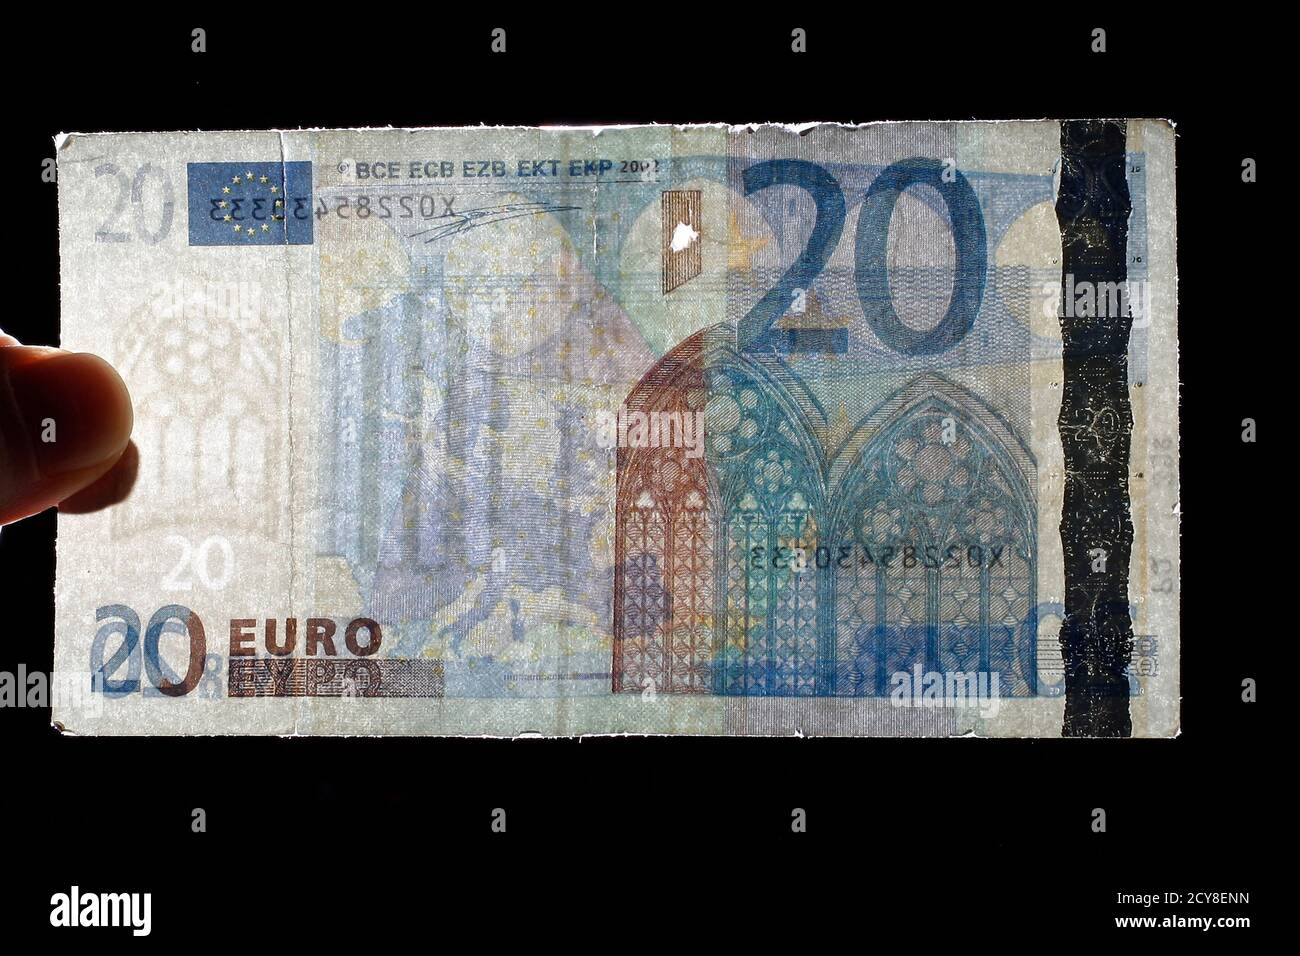 An Employee Of Austrian National Bank Oenb Shows Counterfeit Euro Banknote In Vienna January 21 11 The Value Of The Euro May Have Come Under Pressure In Recent Months But There